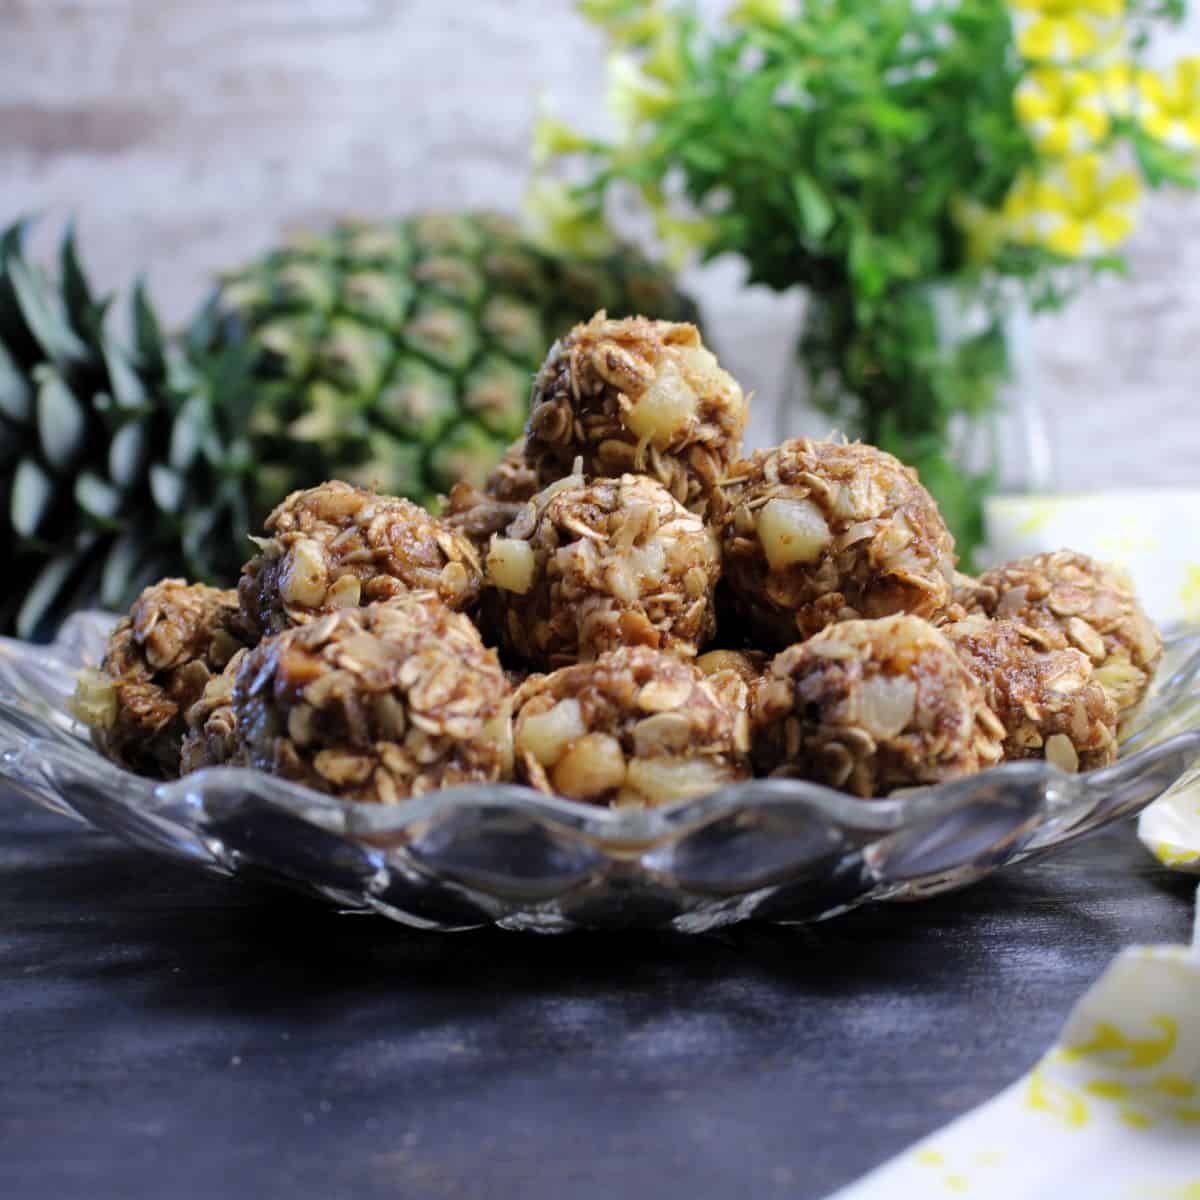 Featured image for “Pina Colada Energy Balls with Fresh Pineapple”